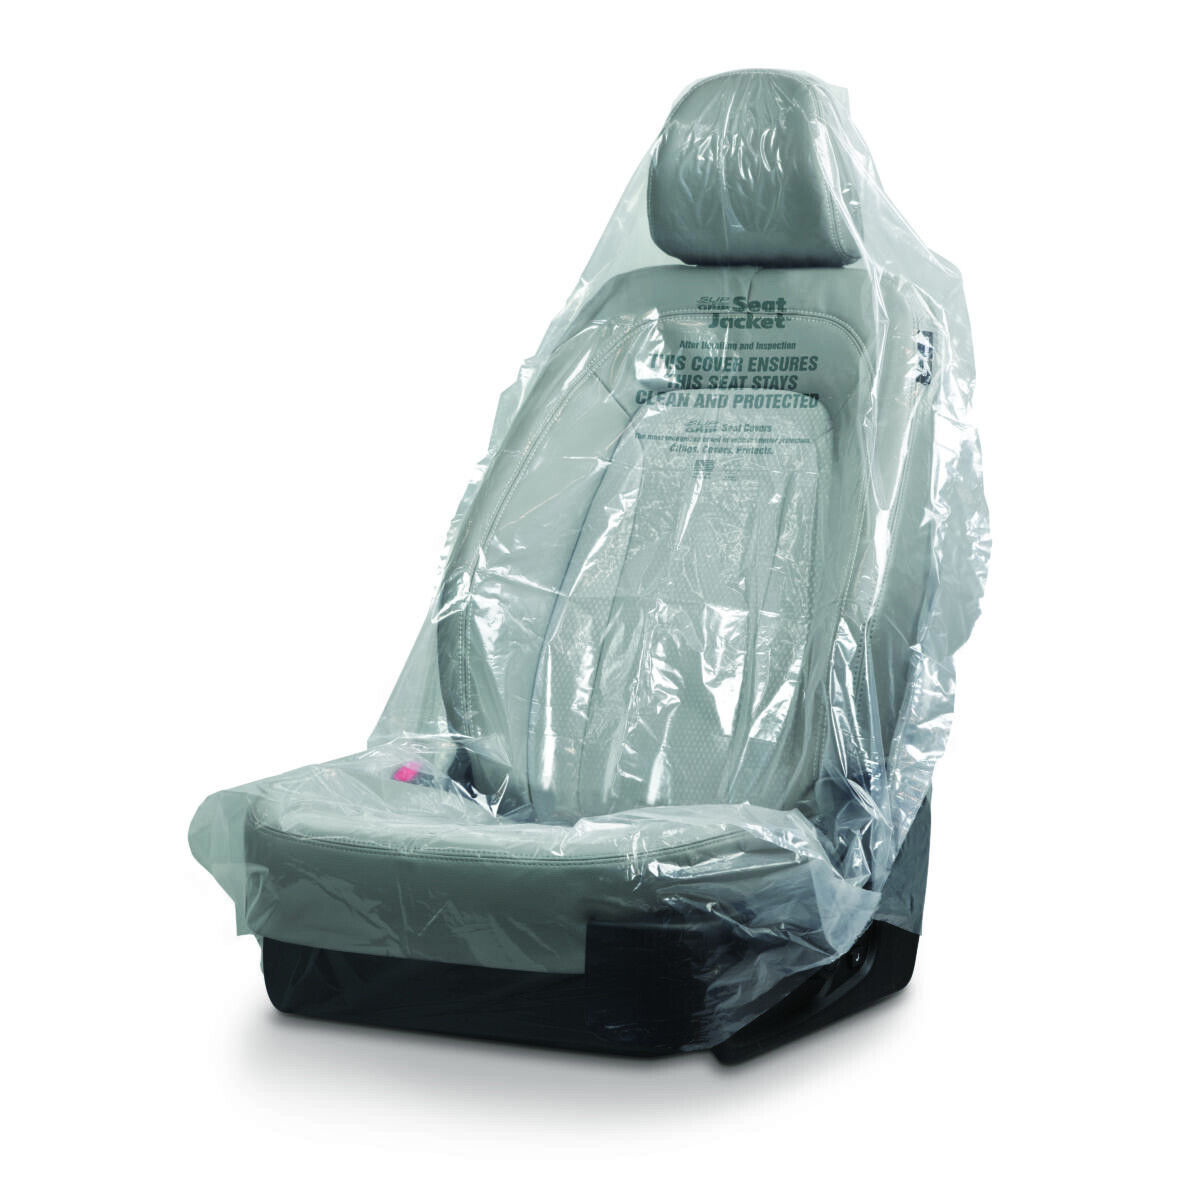 Slip-N-Grip Disposable Plastic Car Seat Cover Roll, 0.5 Mil (500 Covers)